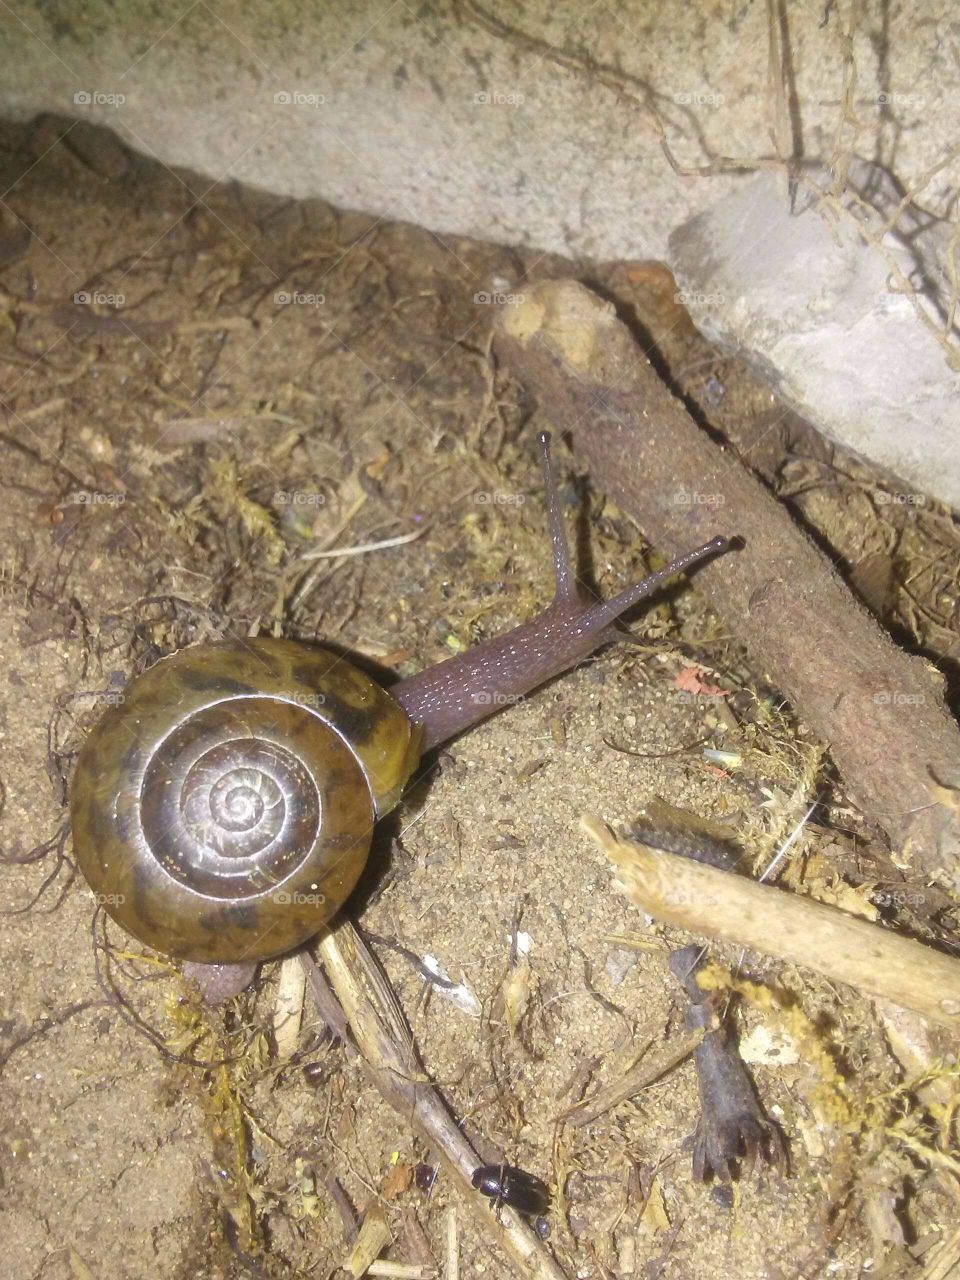 Snail sticking his neck out